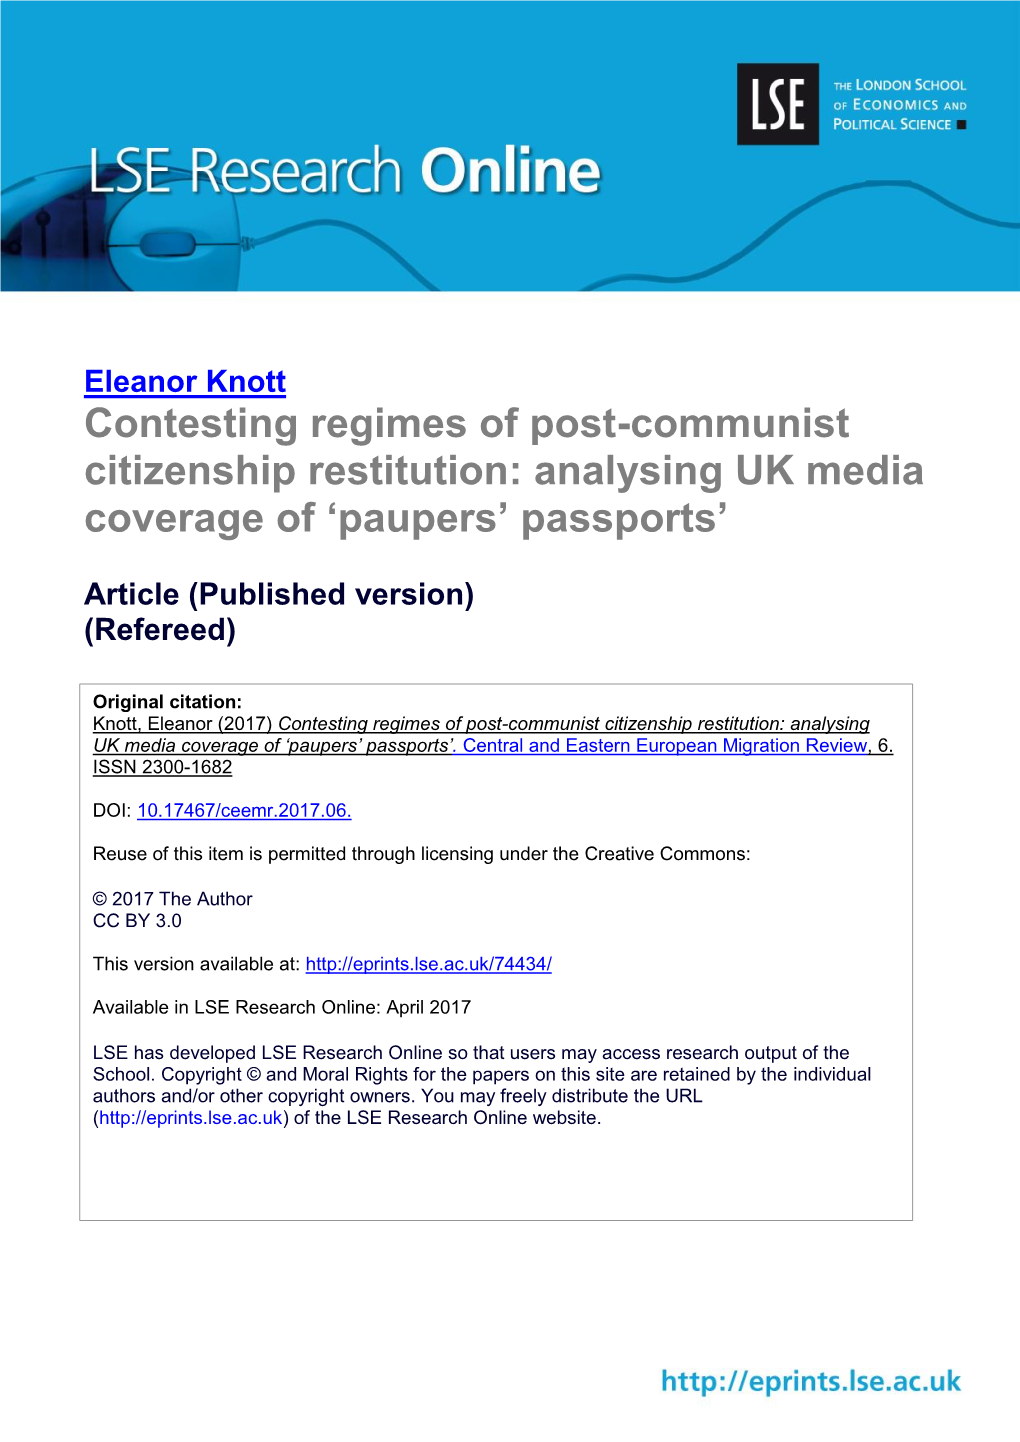 Contesting Regimes of Post-Communist Citizenship Restitution: Analysing UK Media Coverage of ‘Paupers’ Passports’